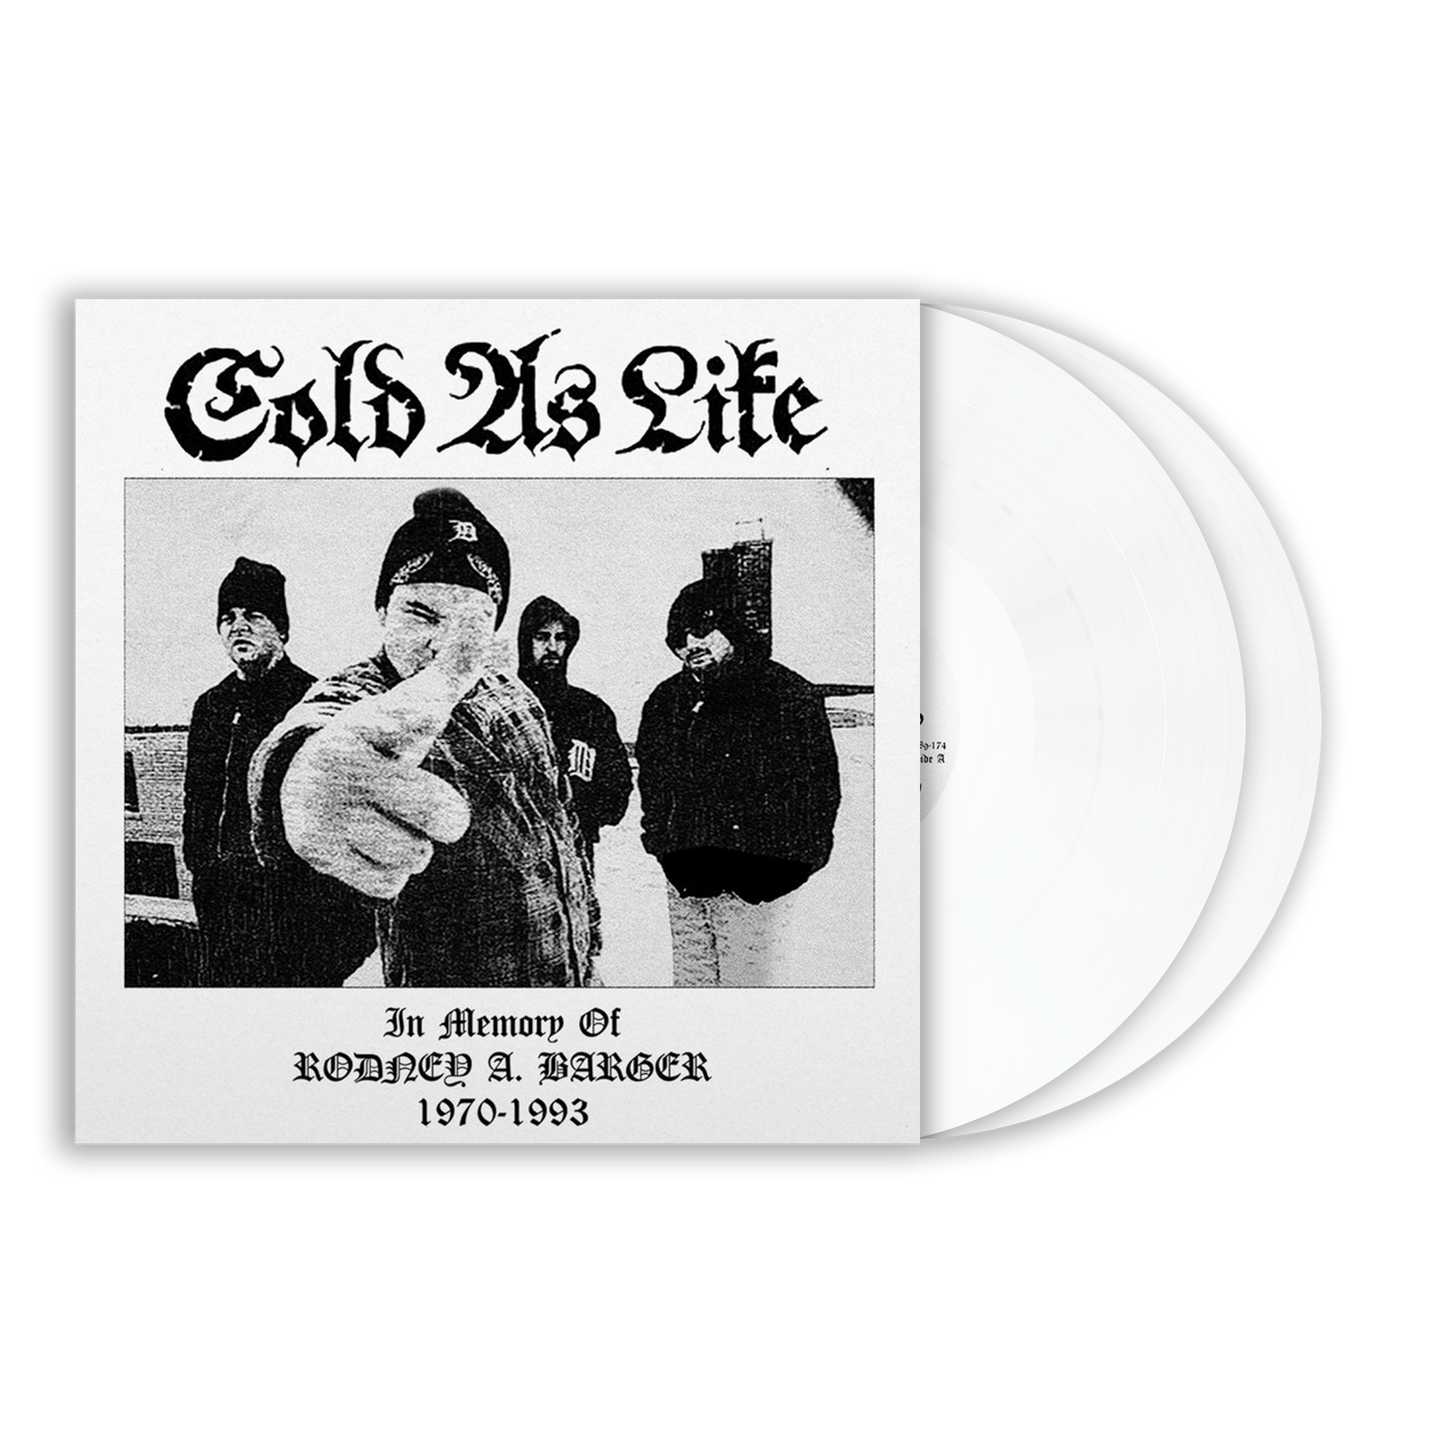 Cold As Life "In Memory Of Rodney A. Barger (1970-1993)" 2xLP